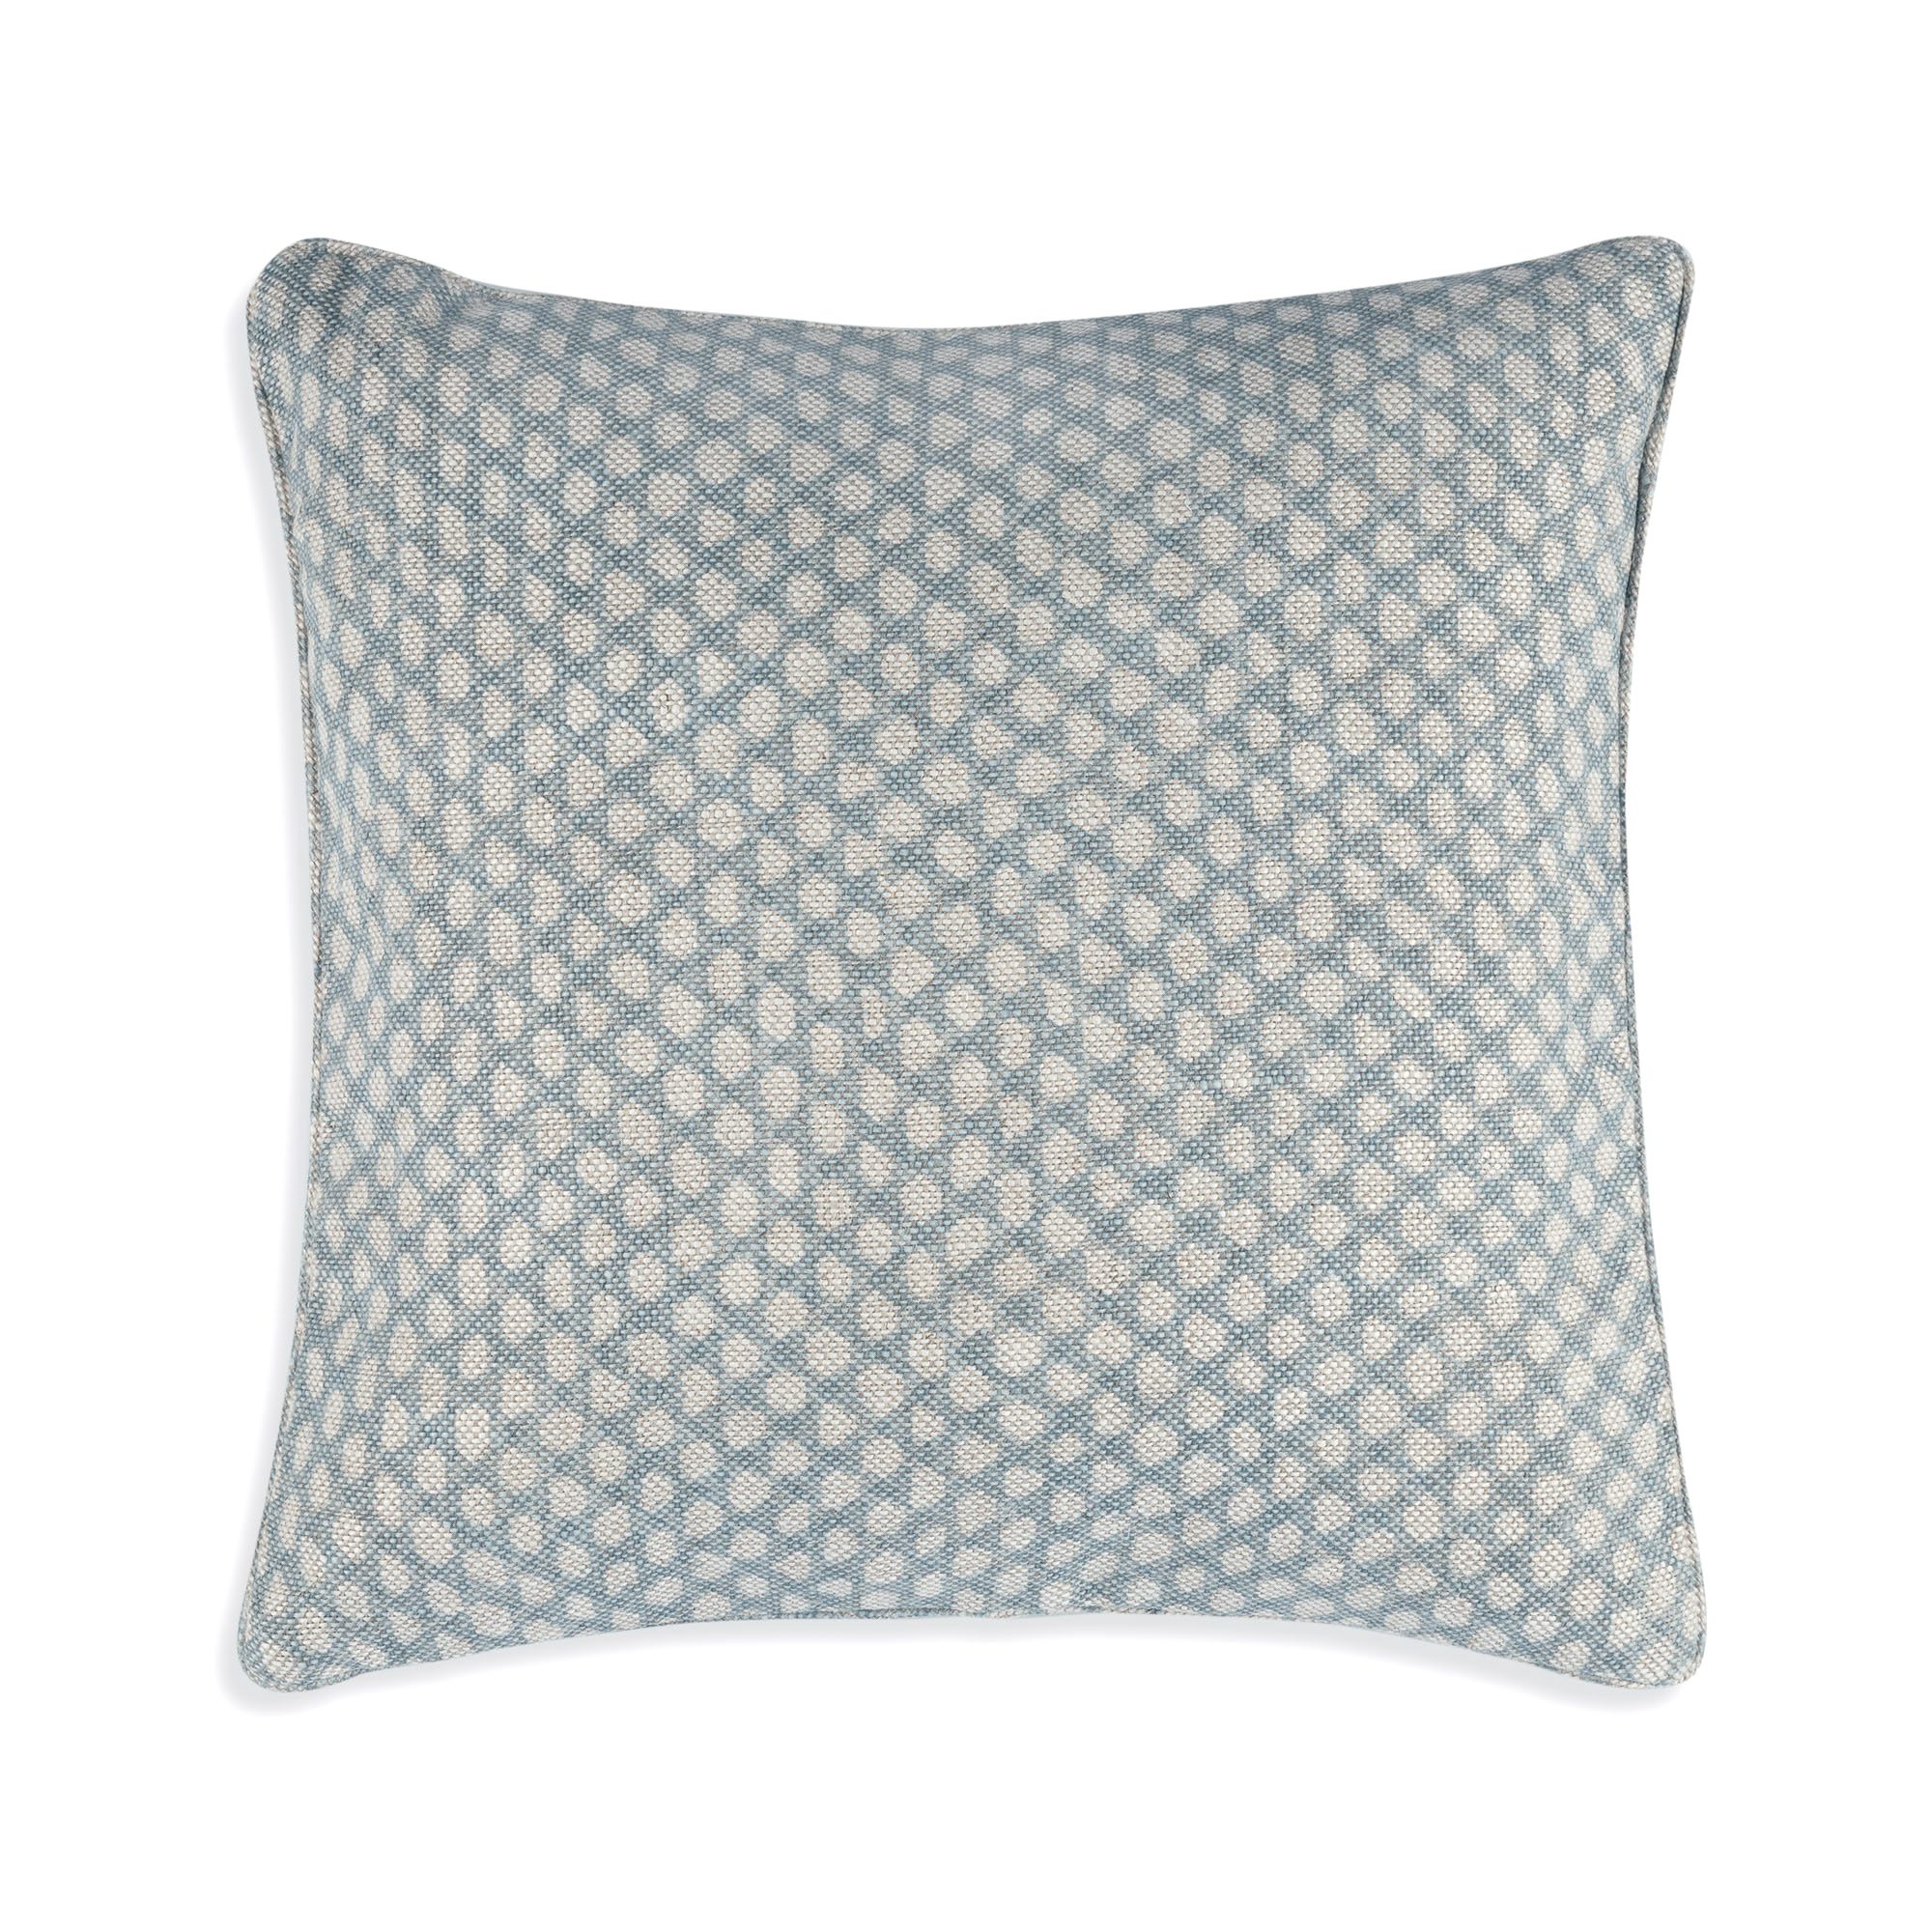 Large Square Cushion in Light Blue Wicker